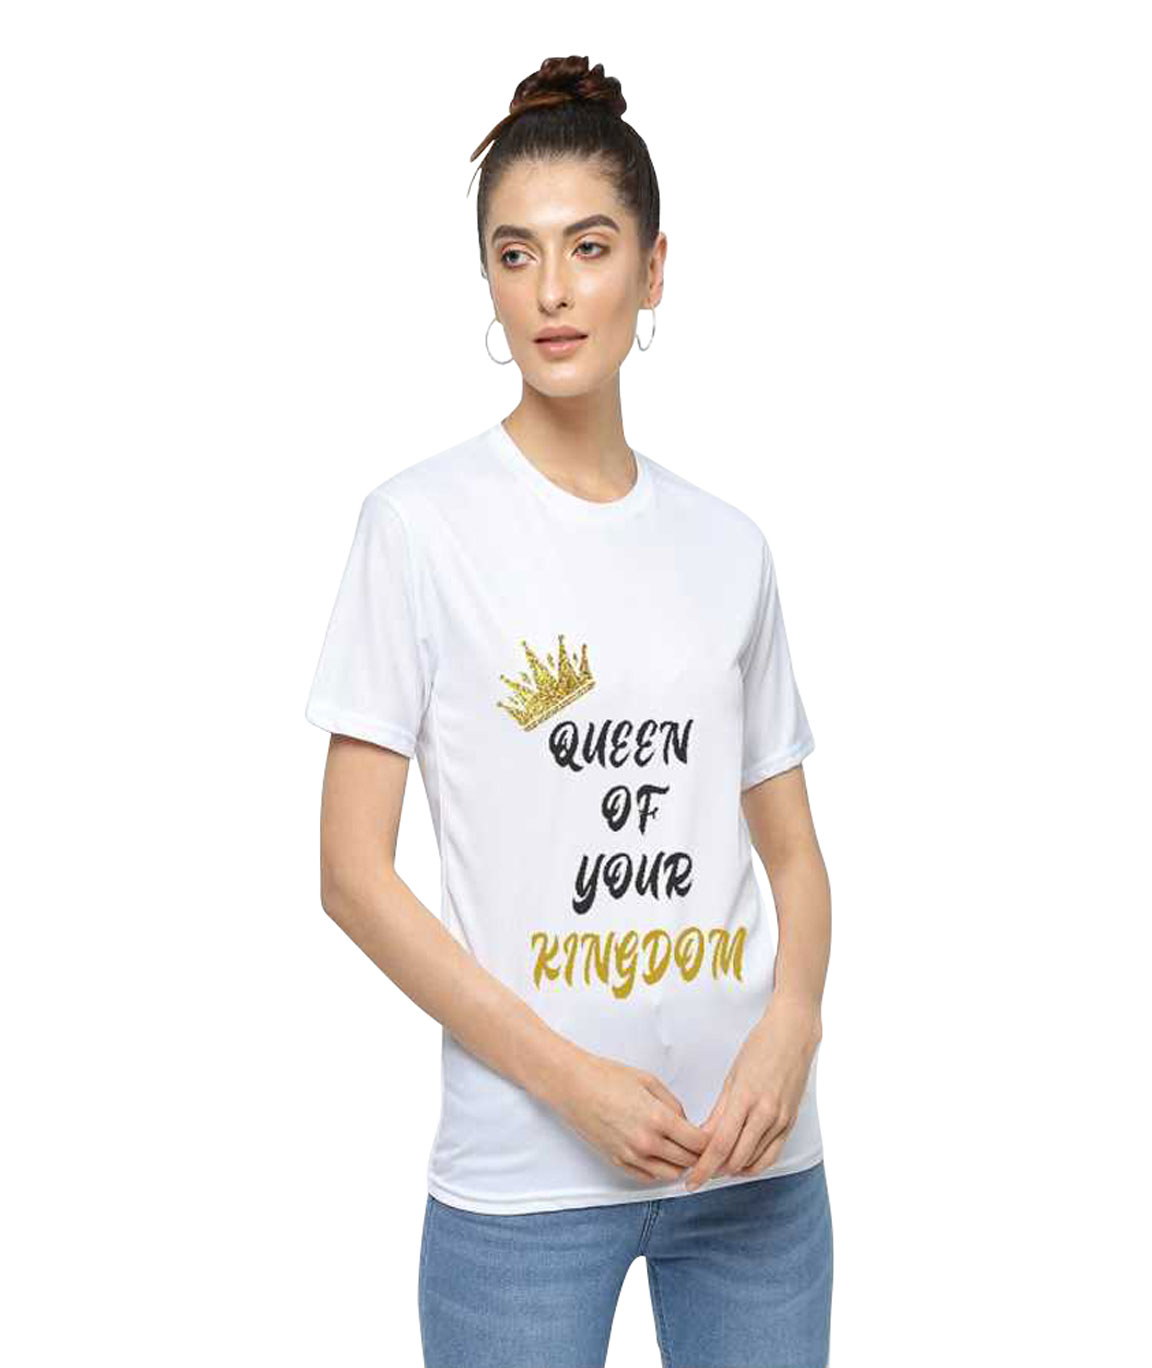 QUEEN OF YOUR KINGDOM PRINTED WOMEN ROUND NECK WHITE T-SHIRT